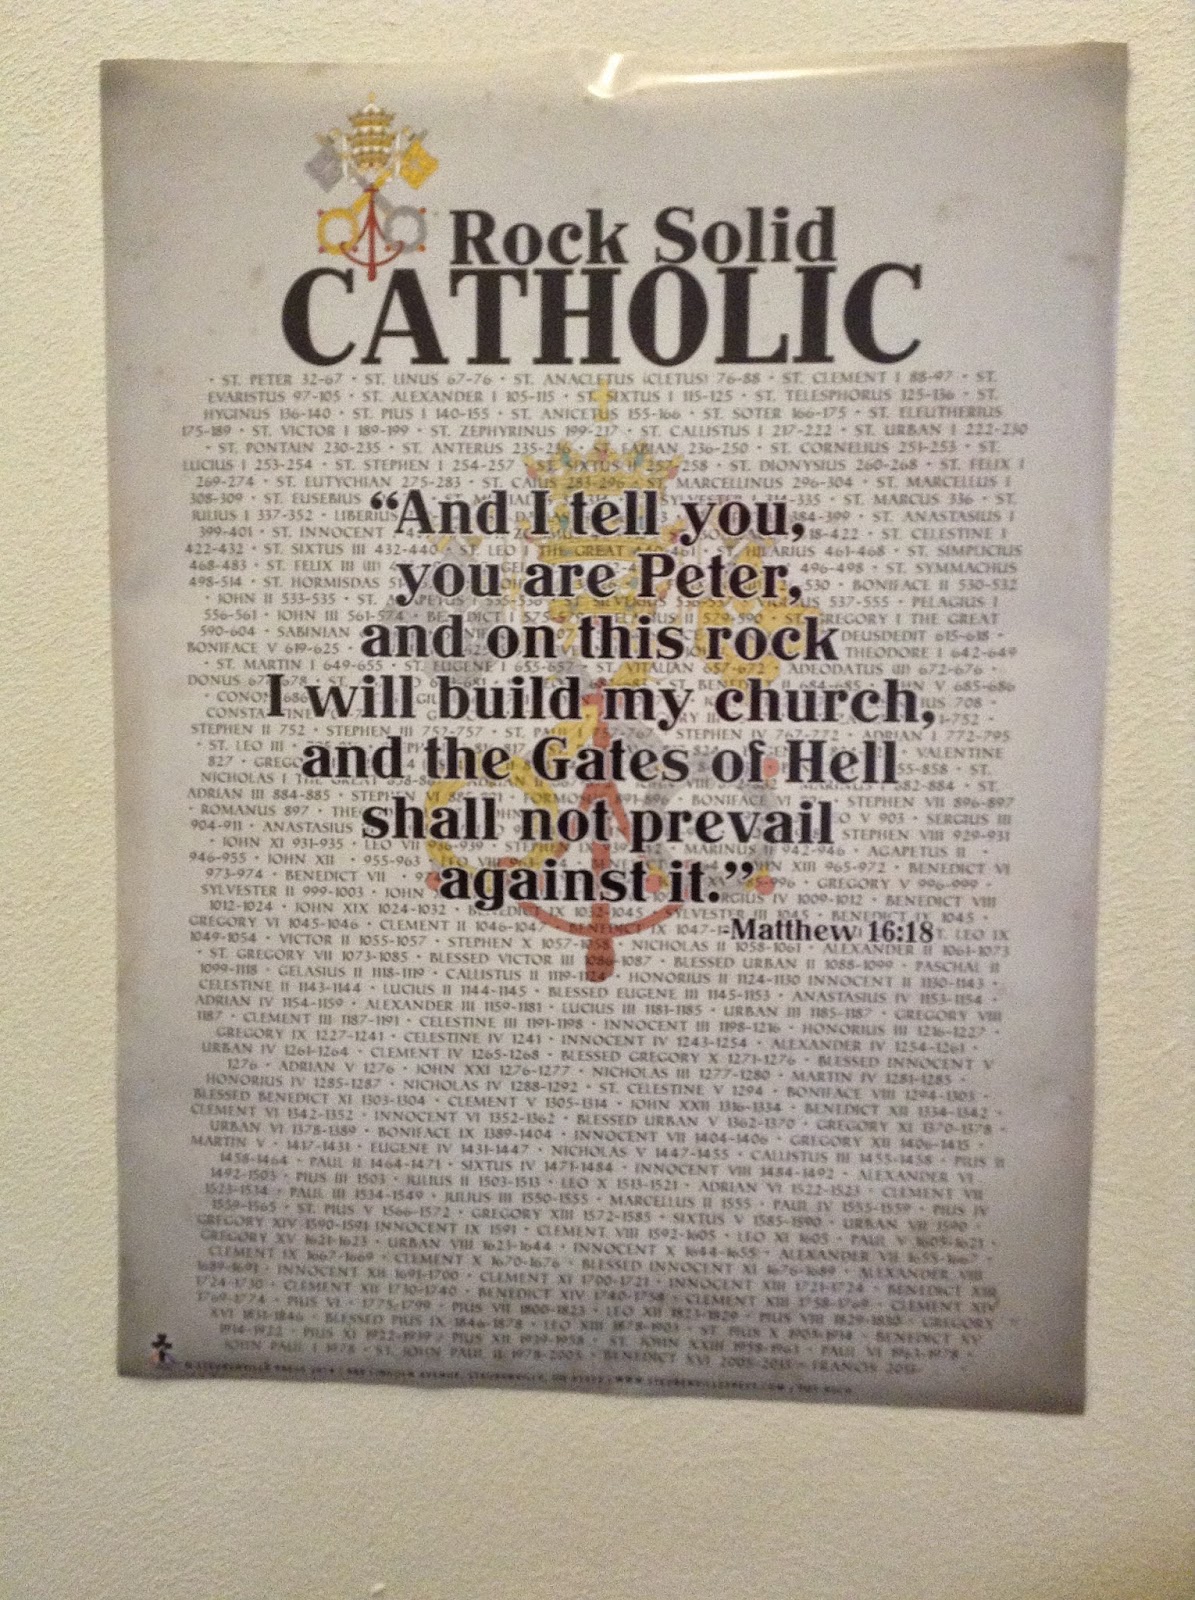 http://www.steubenvillepress.com/rock-solid-catholic-popes-of-the-church-poster/